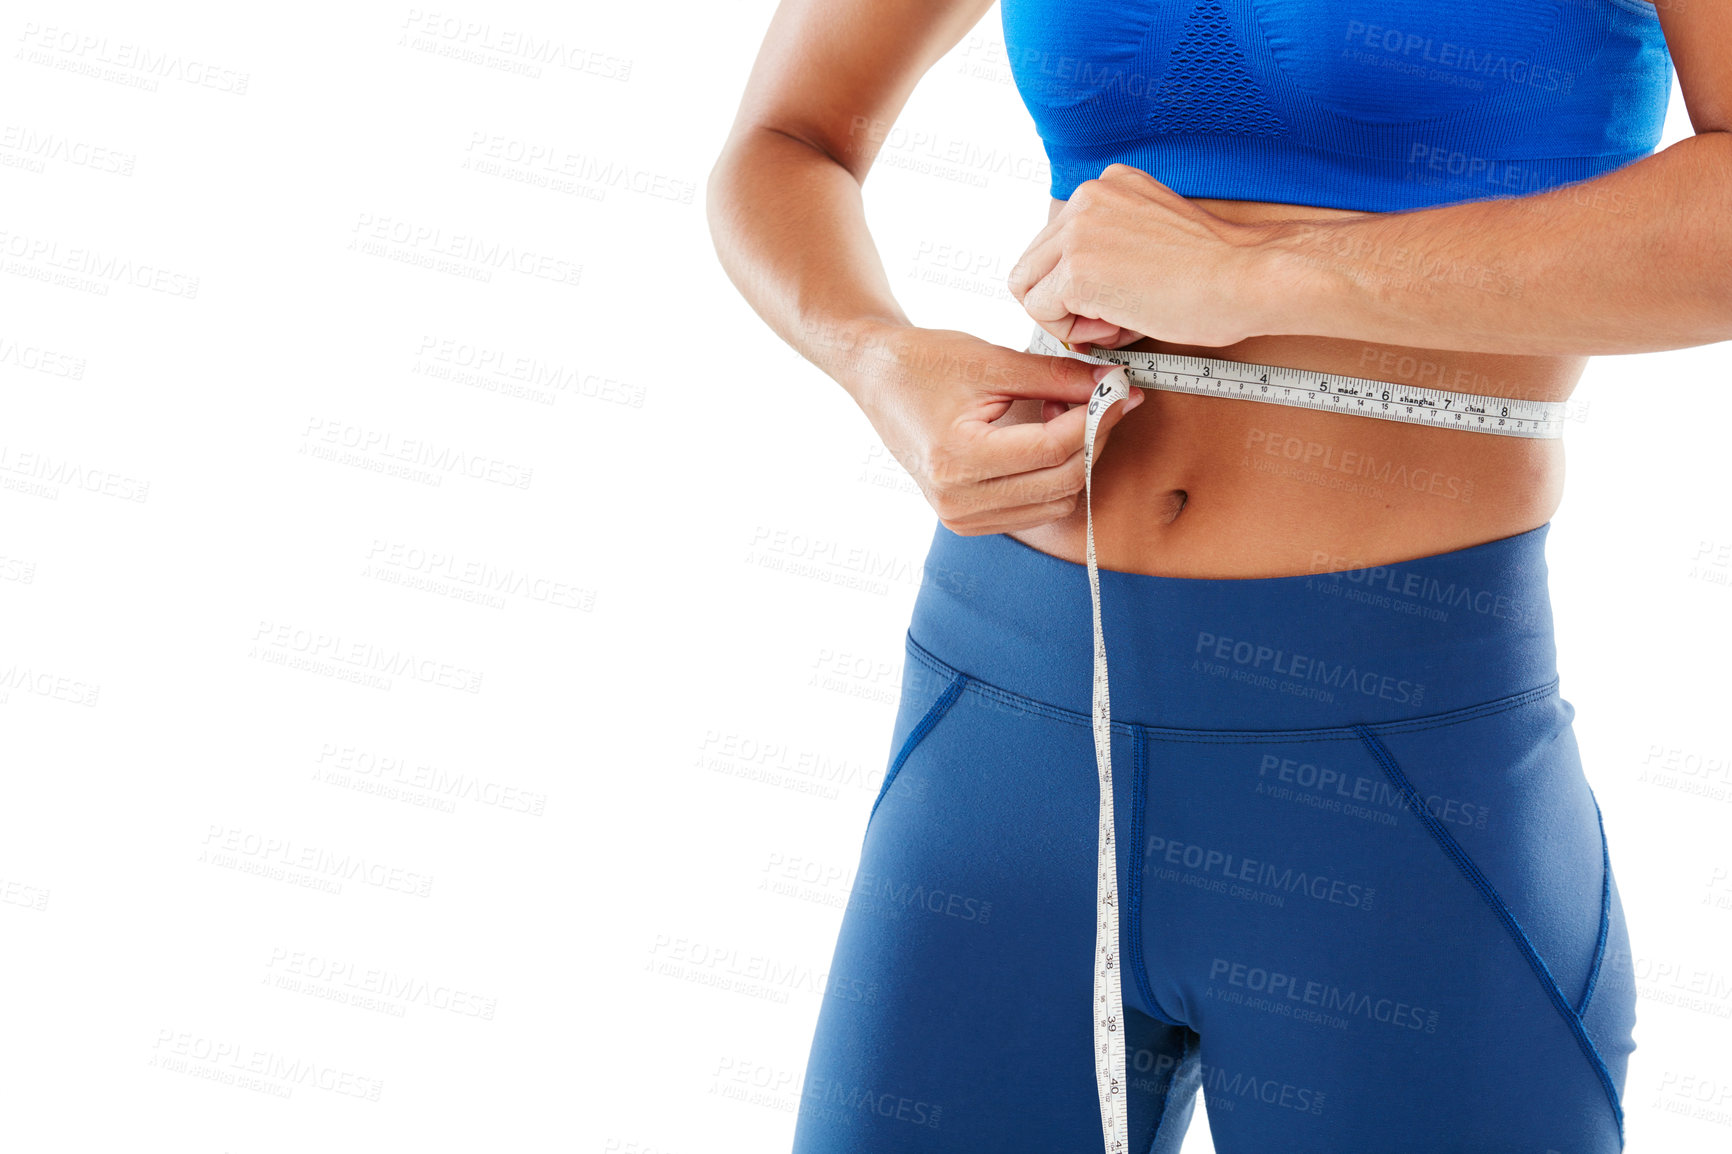 Buy stock photo Shot of a sporty young woman measuring her waist against a white background